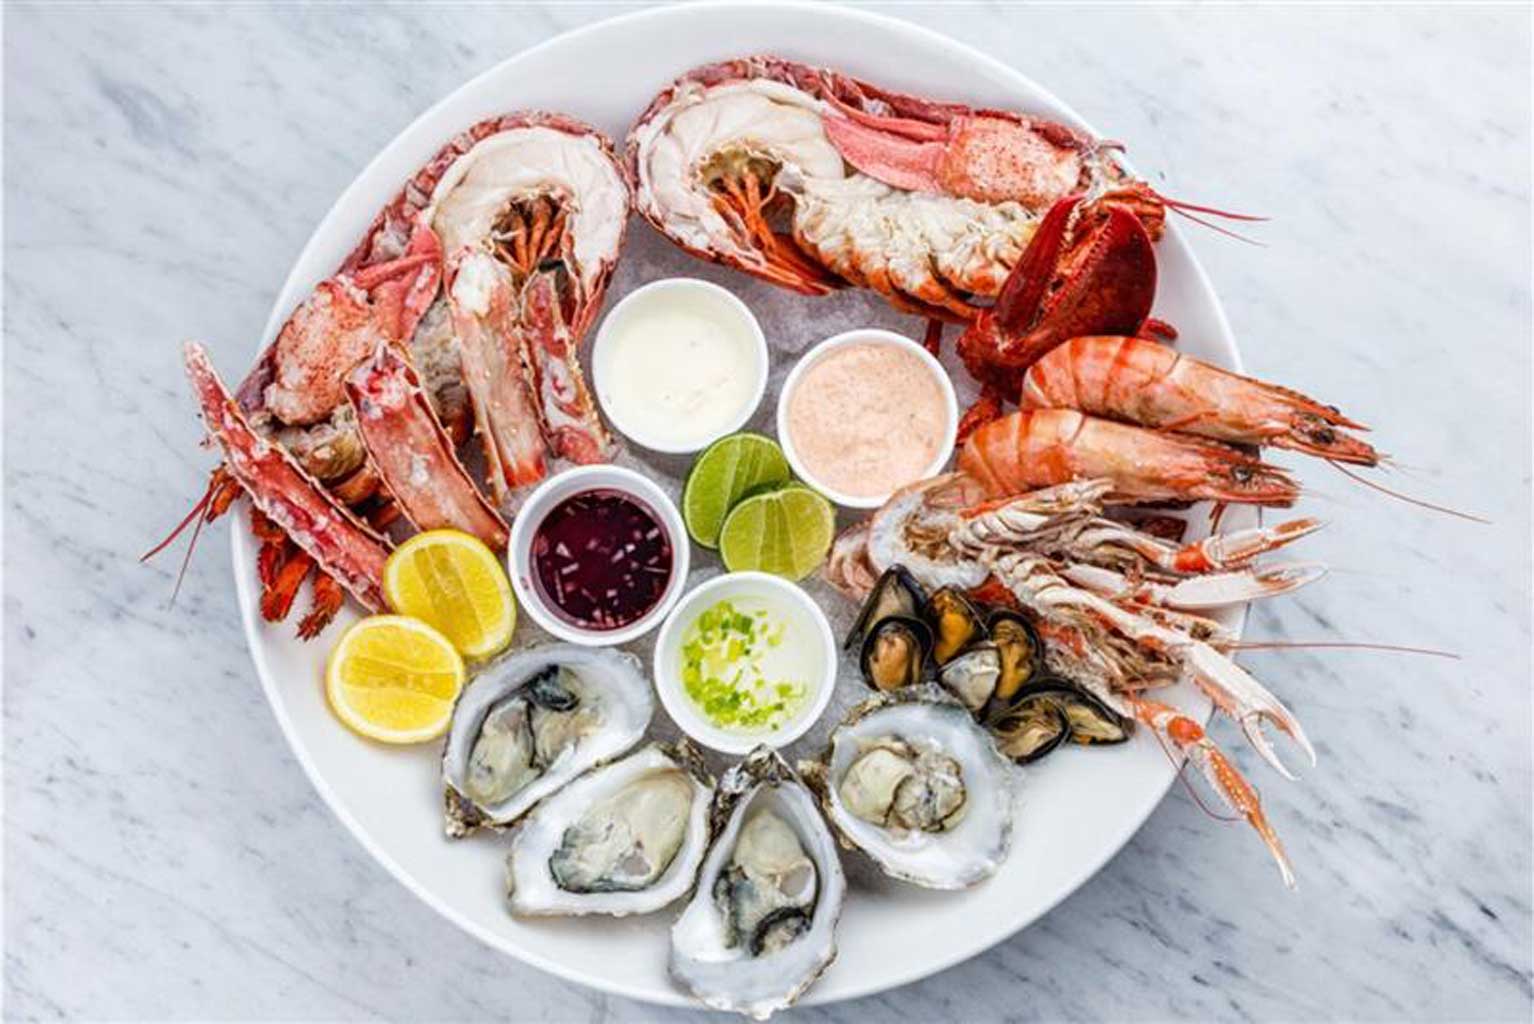 a fresh seafood plate full of oysters, shellfish, lobster, and mussels over ice with garnishes of lemon, lime and assorted dipping sauces